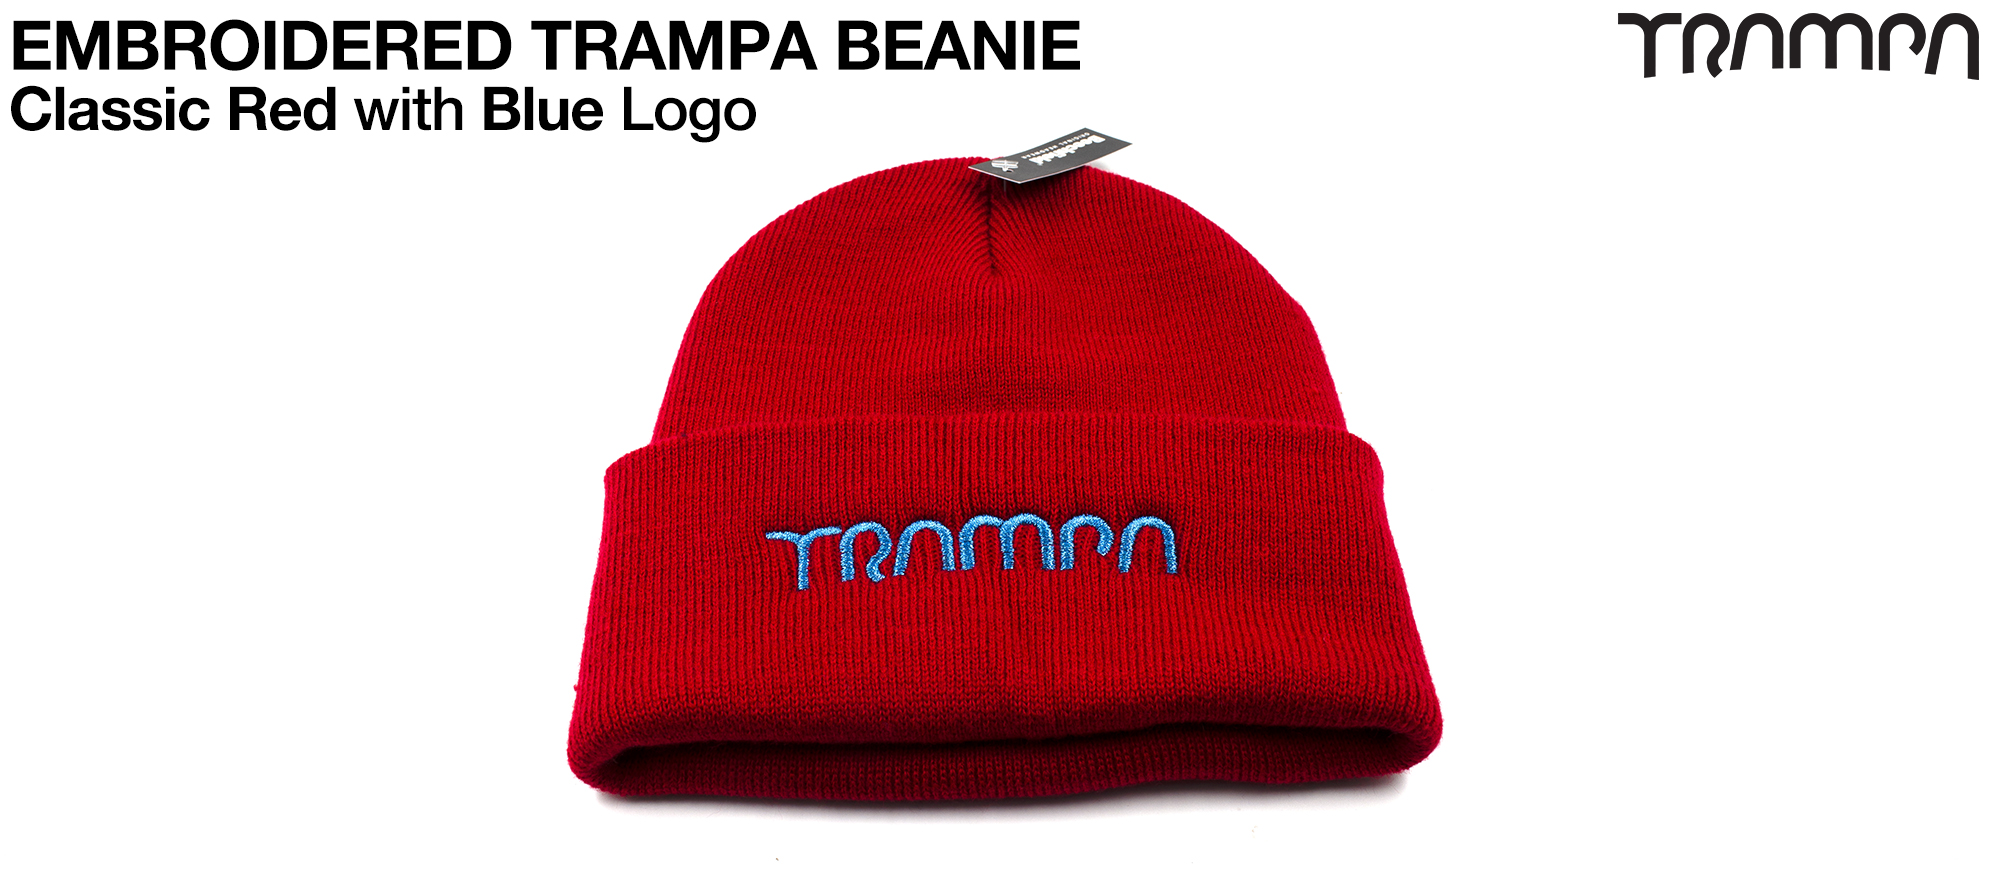 Classic RED Woolly hat with Electric BLUE embroidered TRAMPA logo - Double thick turn over for extra warmth 